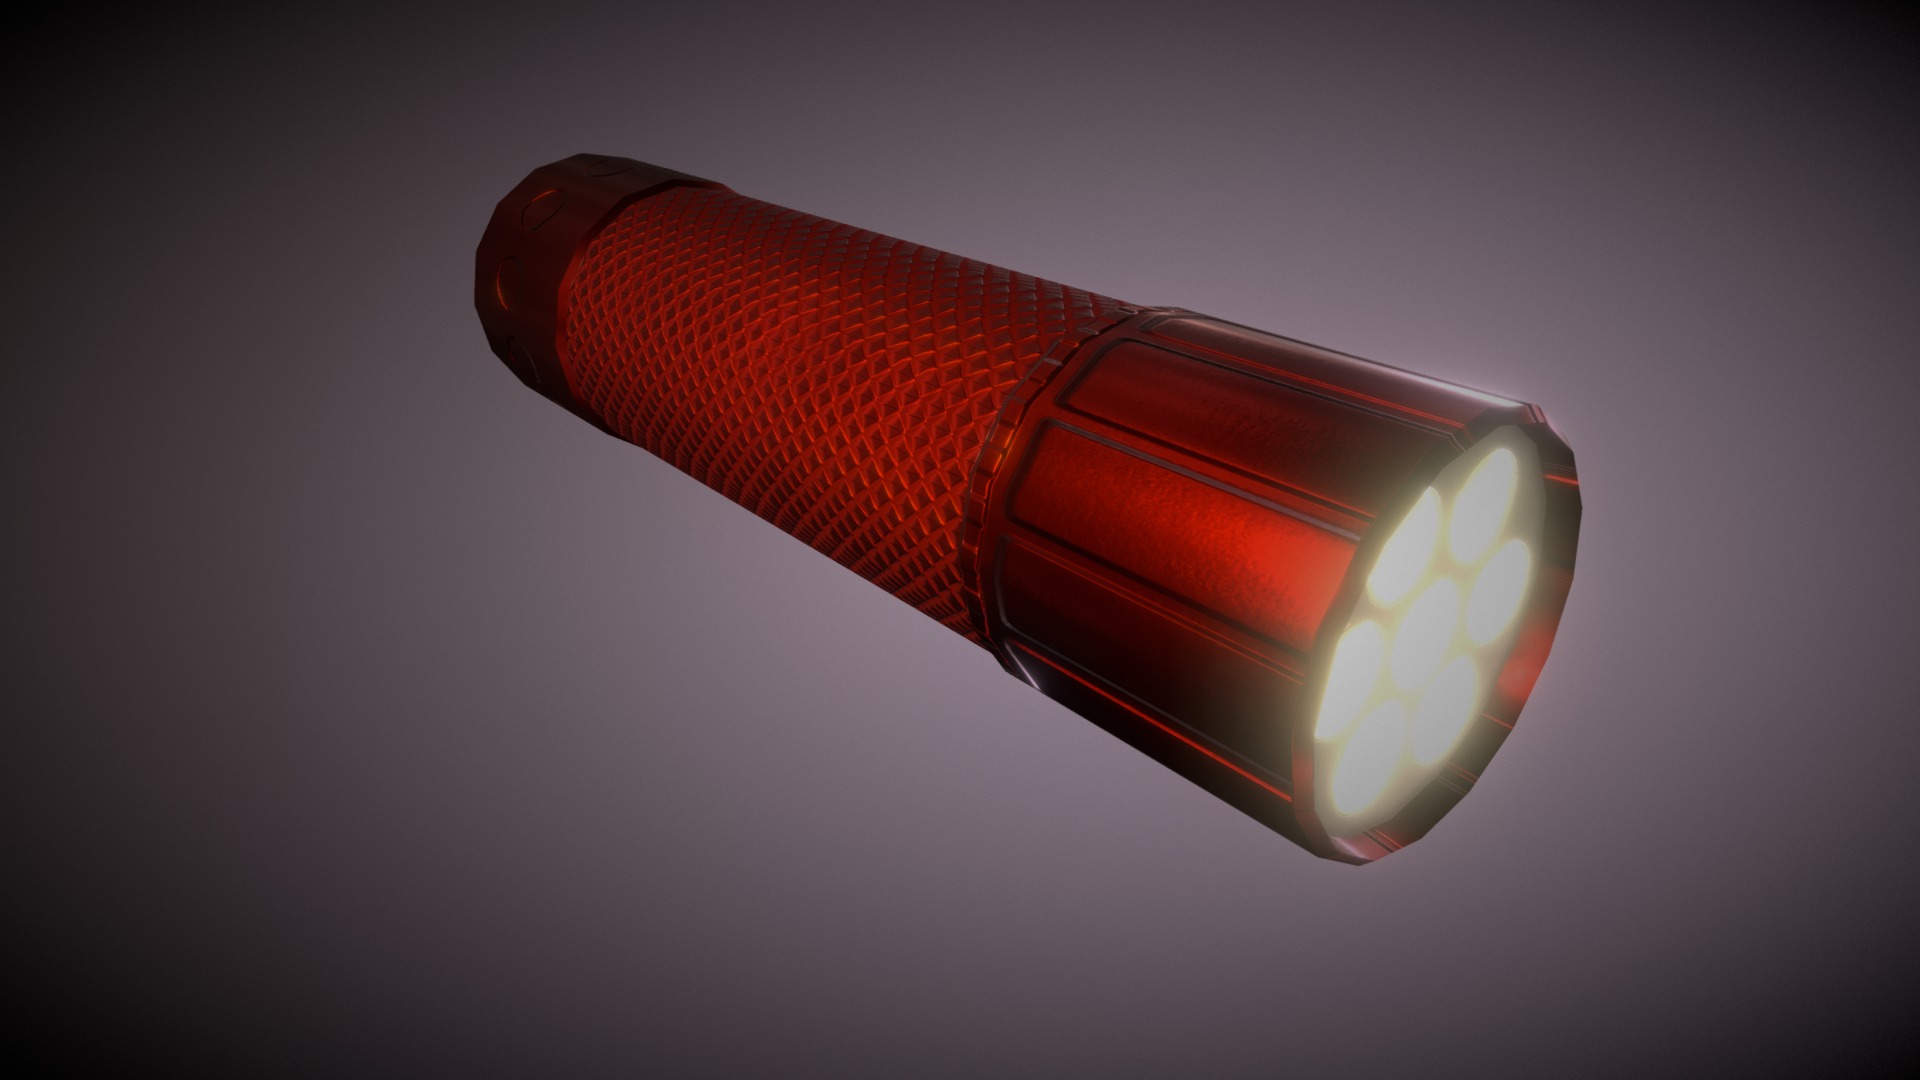 3D model Game Ready Led Lamp Torch Red Aluminum Low Poly - This is a 3D model of the Game Ready Led Lamp Torch Red Aluminum Low Poly. The 3D model is about a red and white cylindrical object.